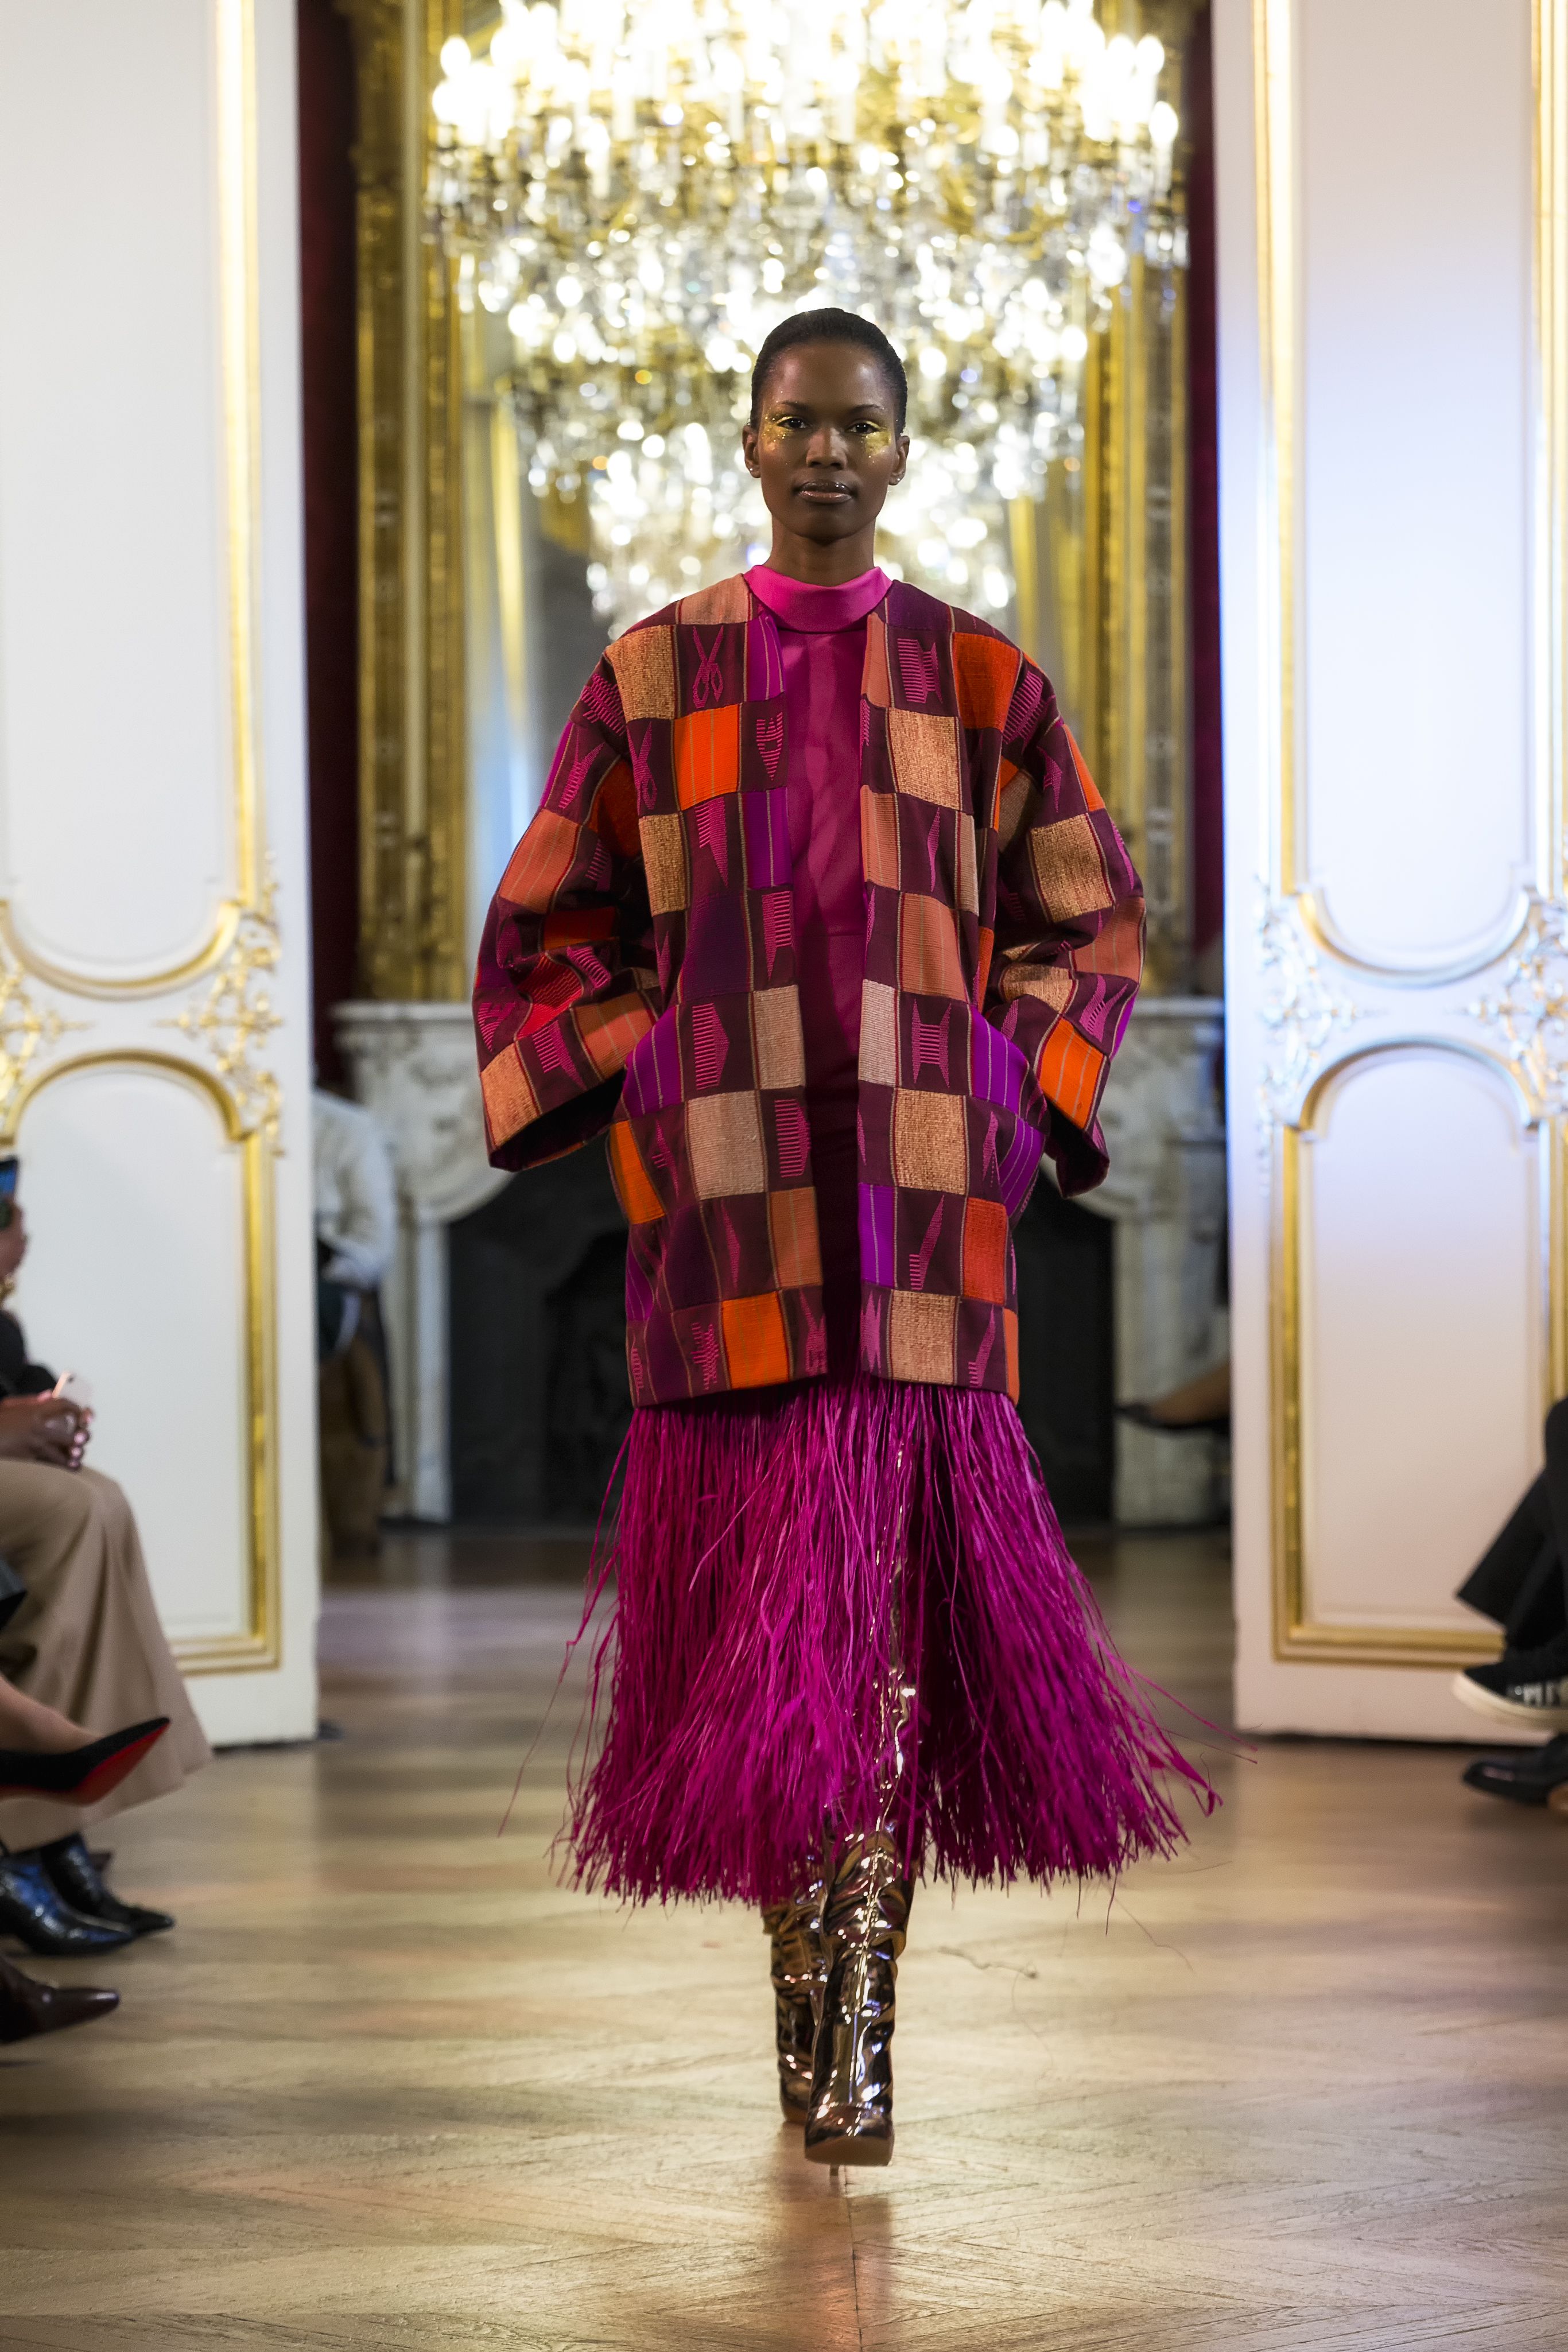 The pioneering Cameroonian designer taking on haute couture